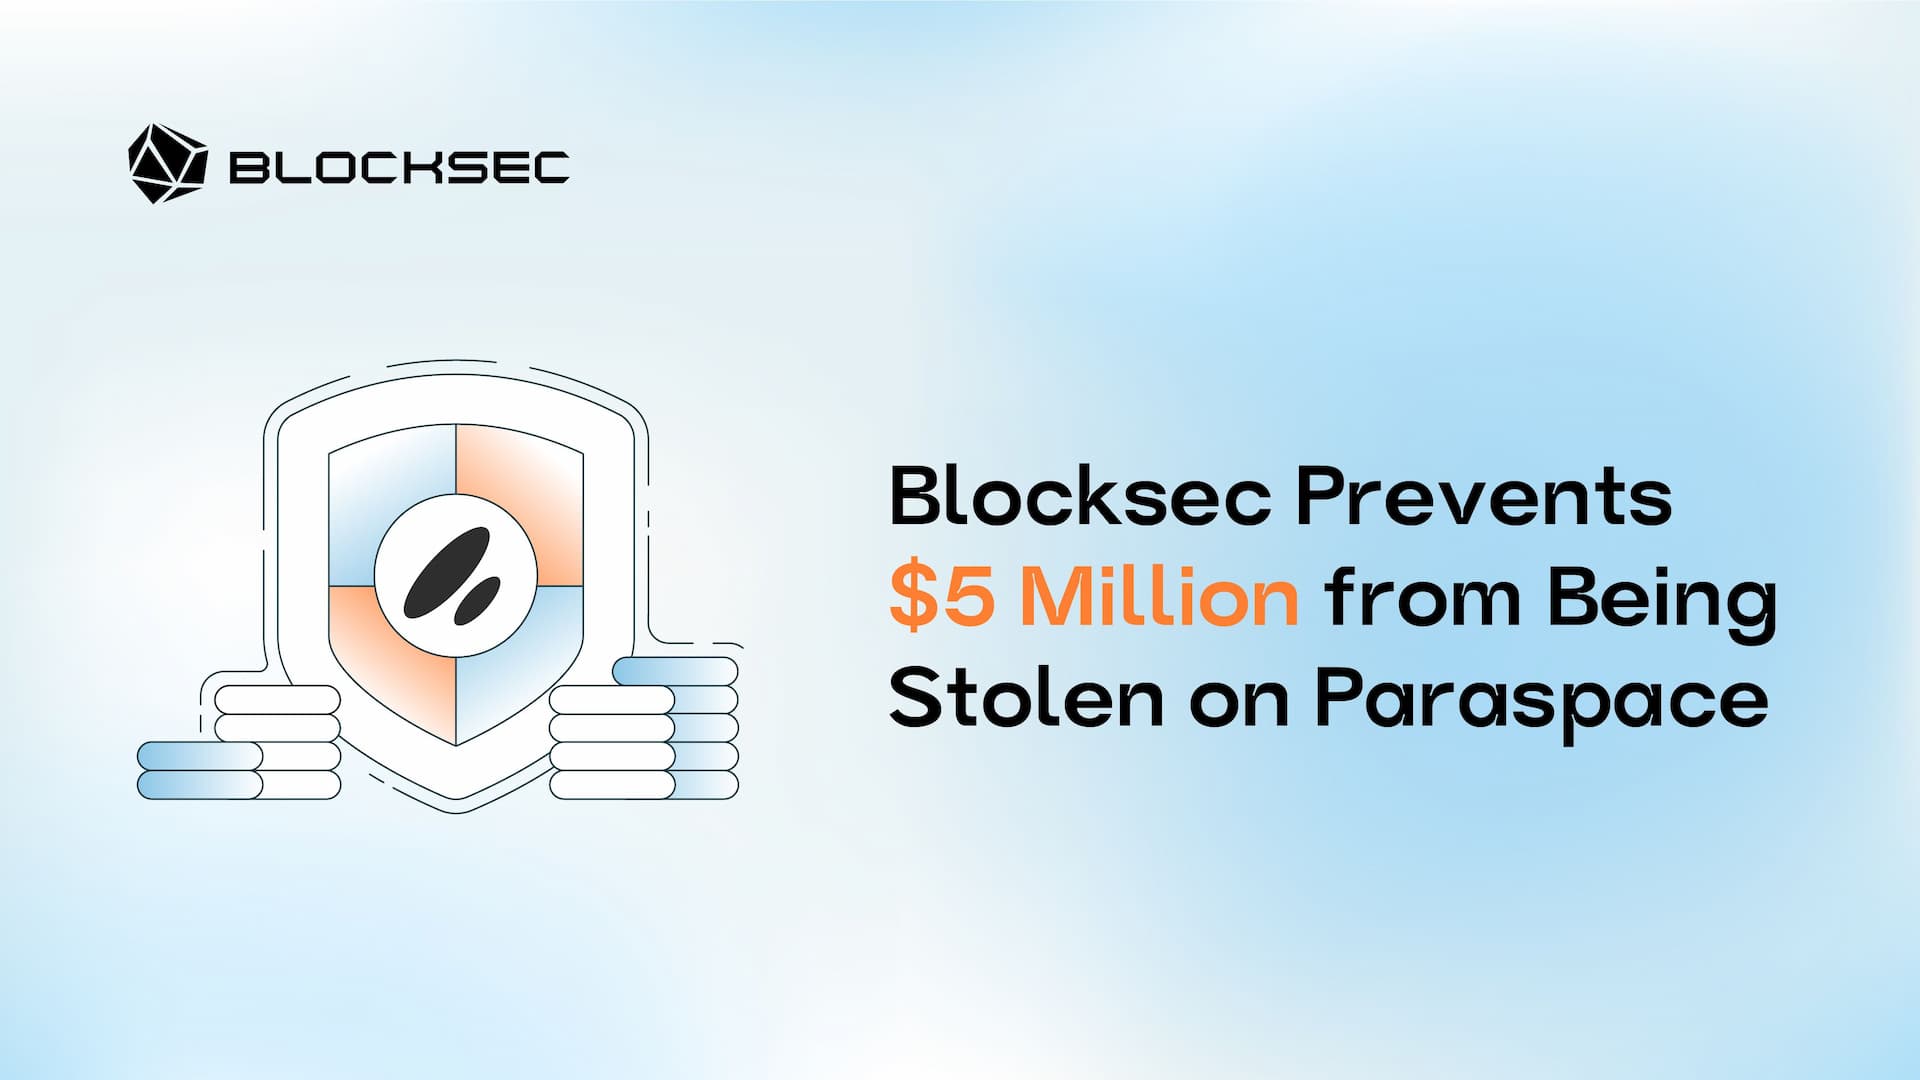 BlockSec Prevents $5 Million from Being Stolen on Paraspace